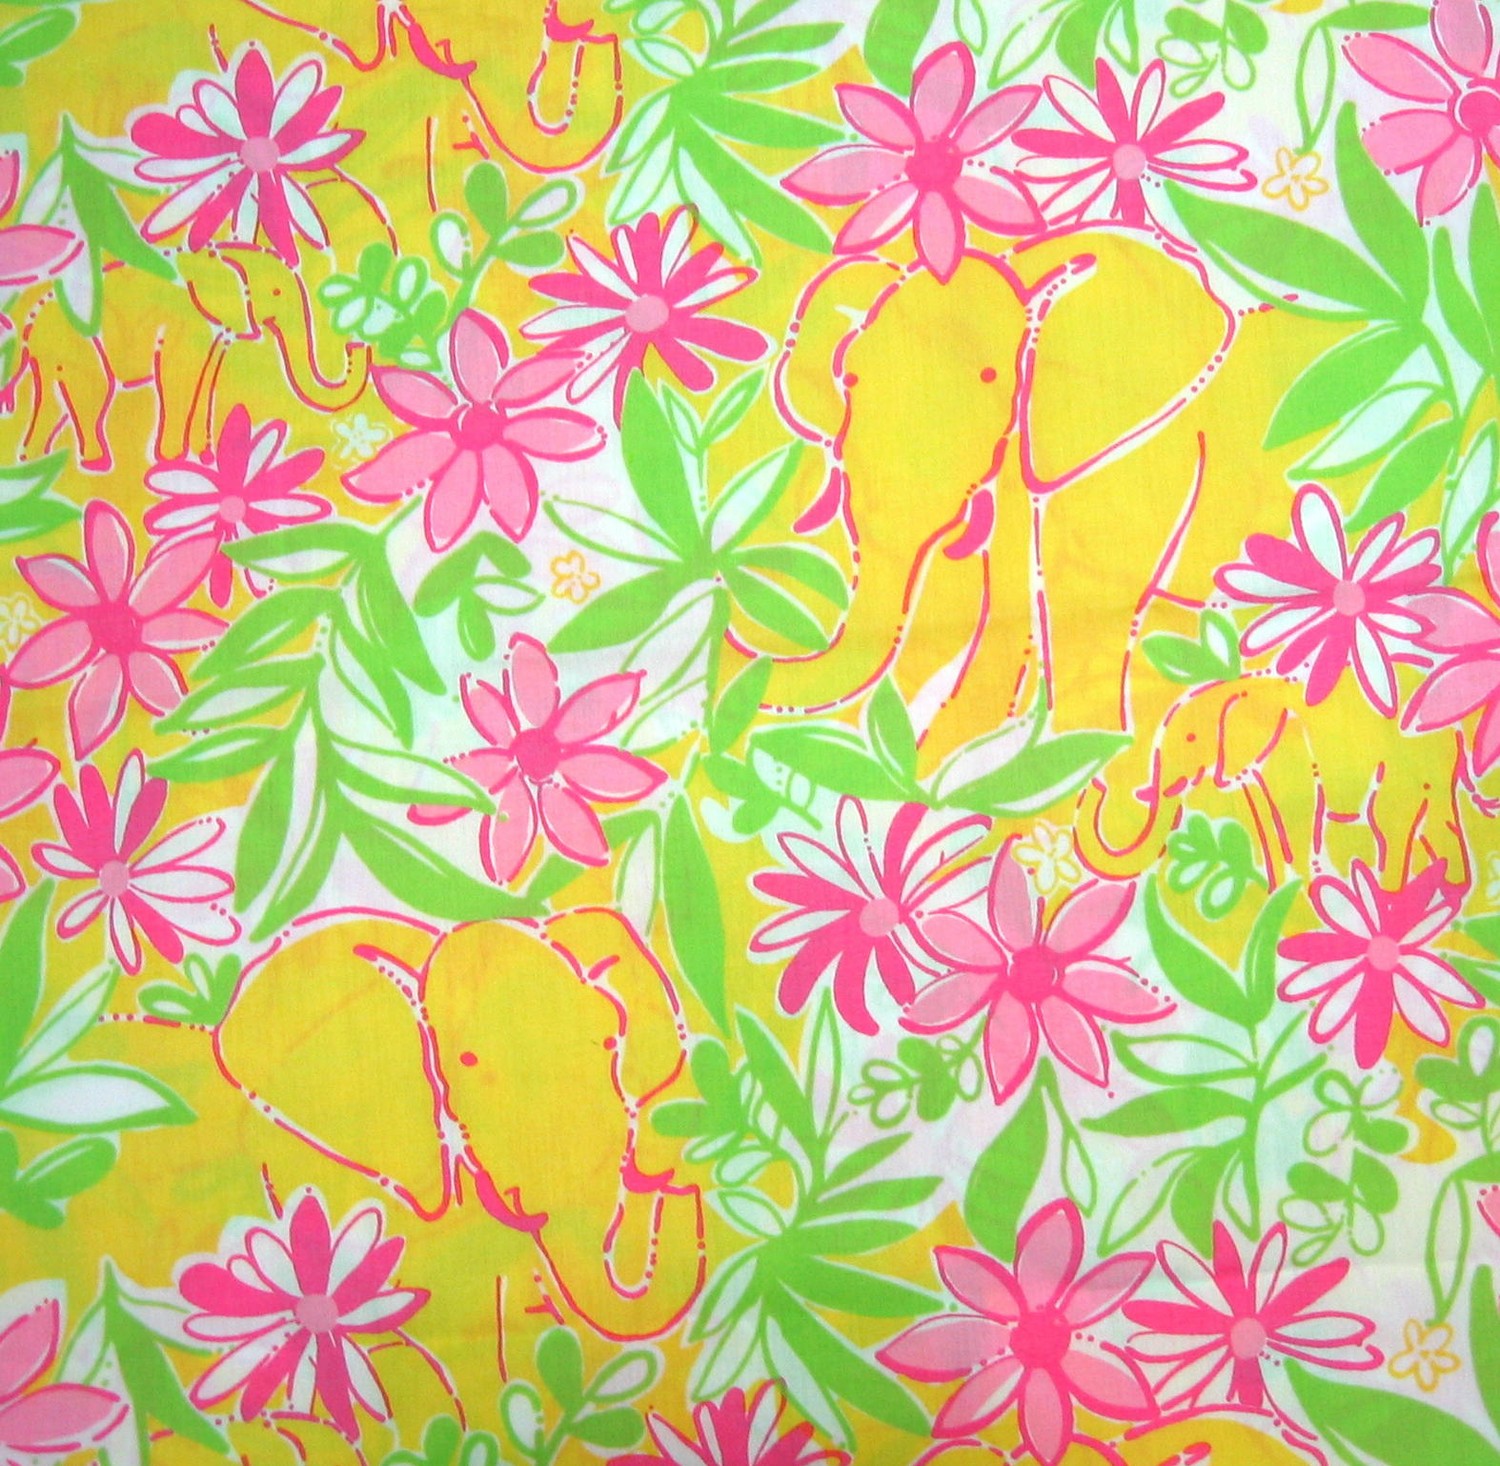 Lilly Pulitzer Backgrounds Elephant   Picture Gallery